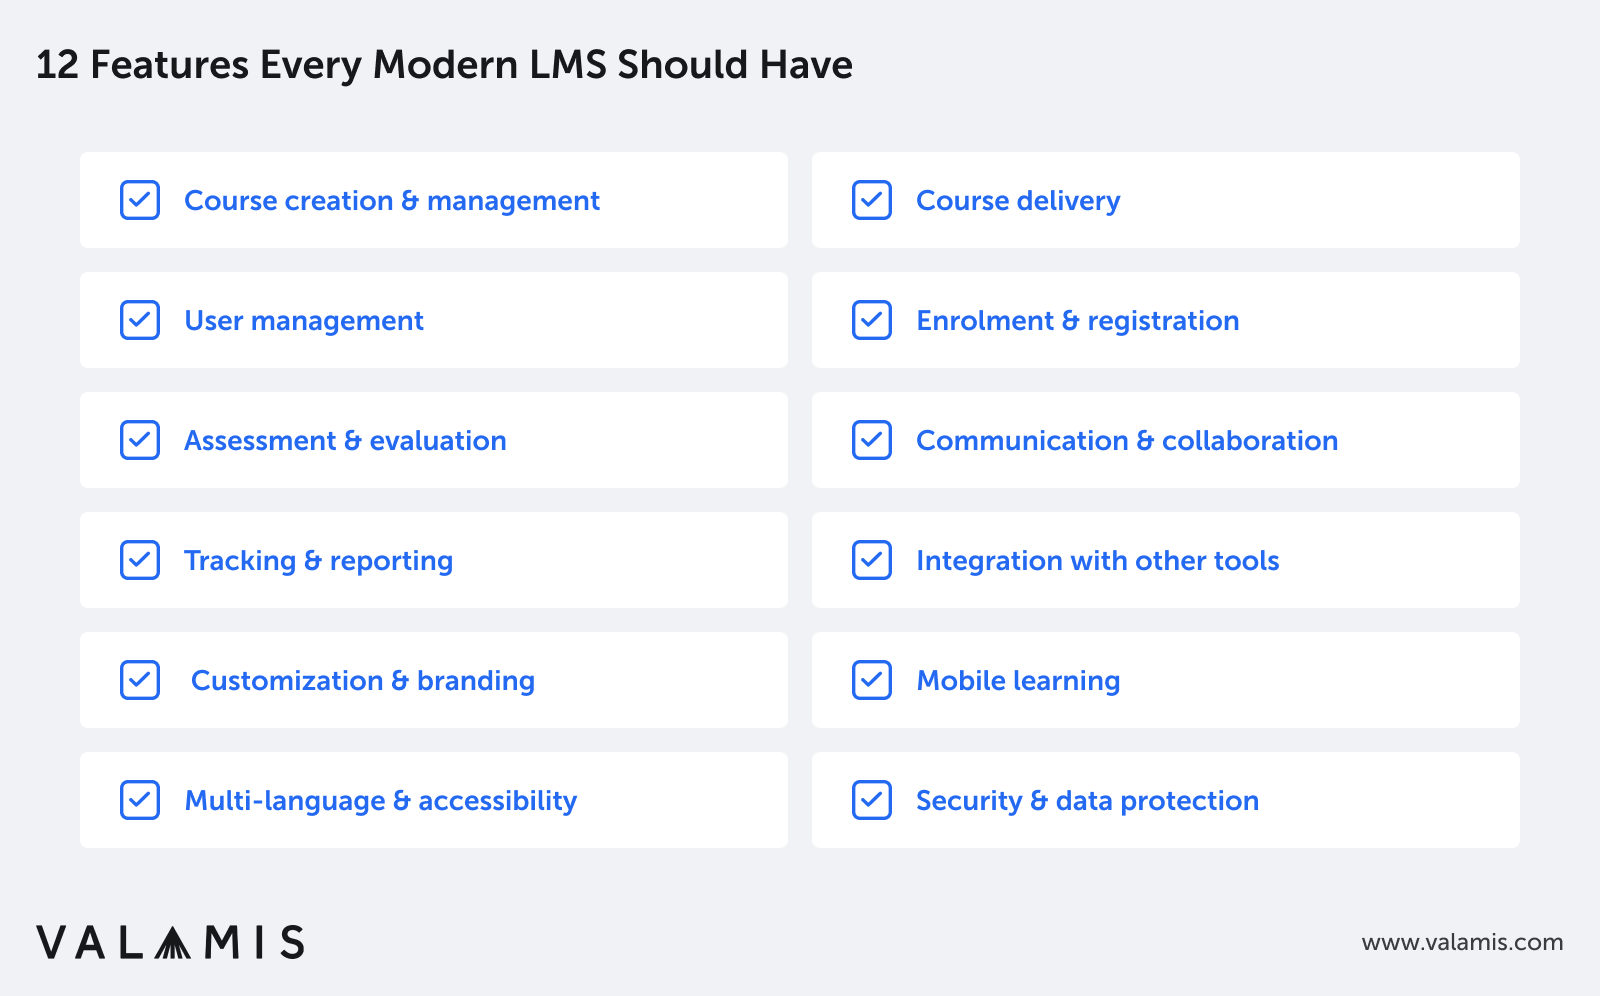 The image lists the 12 features every LMS should have